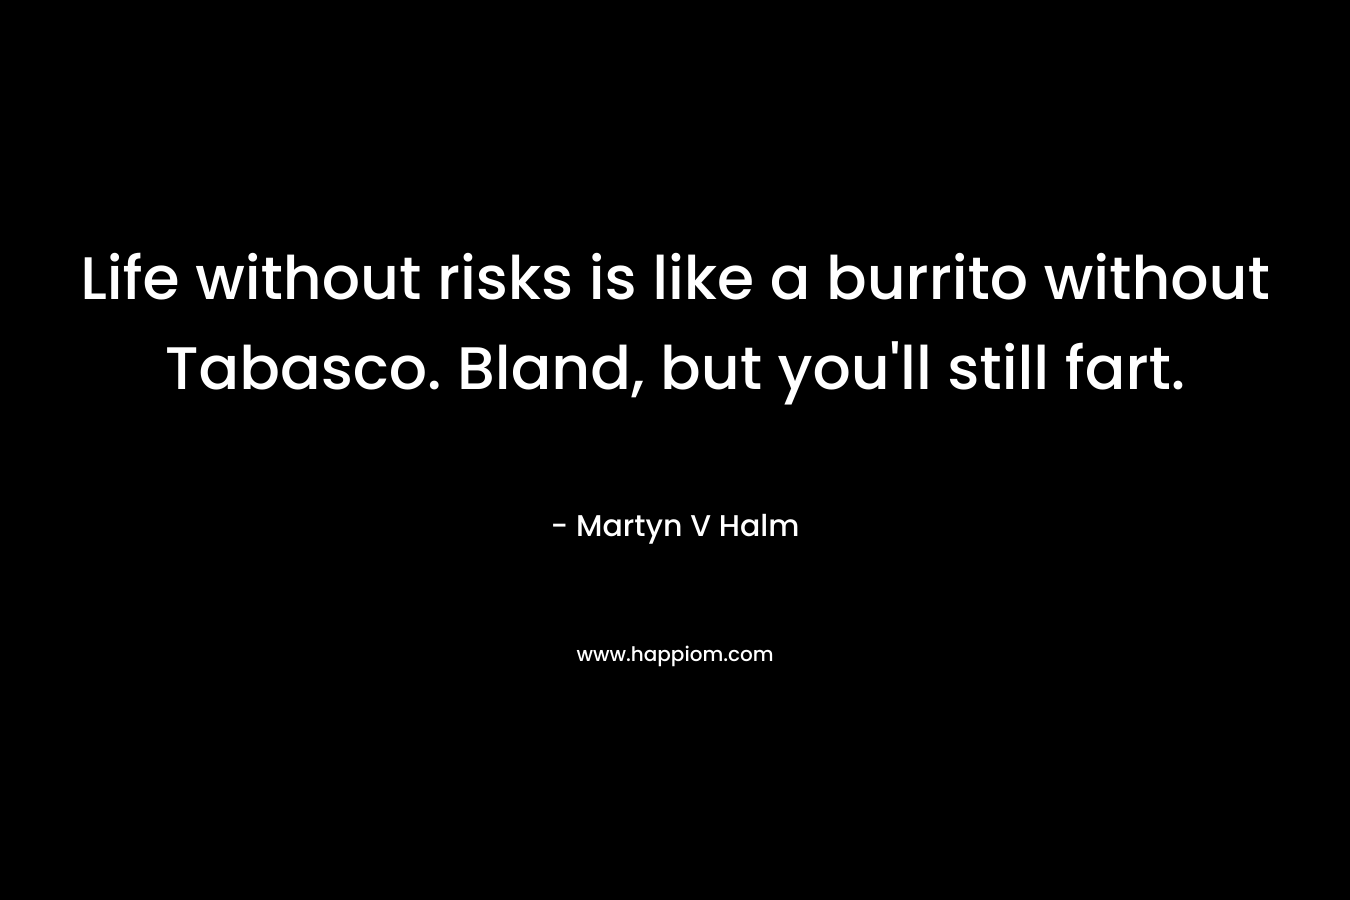 Life without risks is like a burrito without Tabasco. Bland, but you'll still fart.